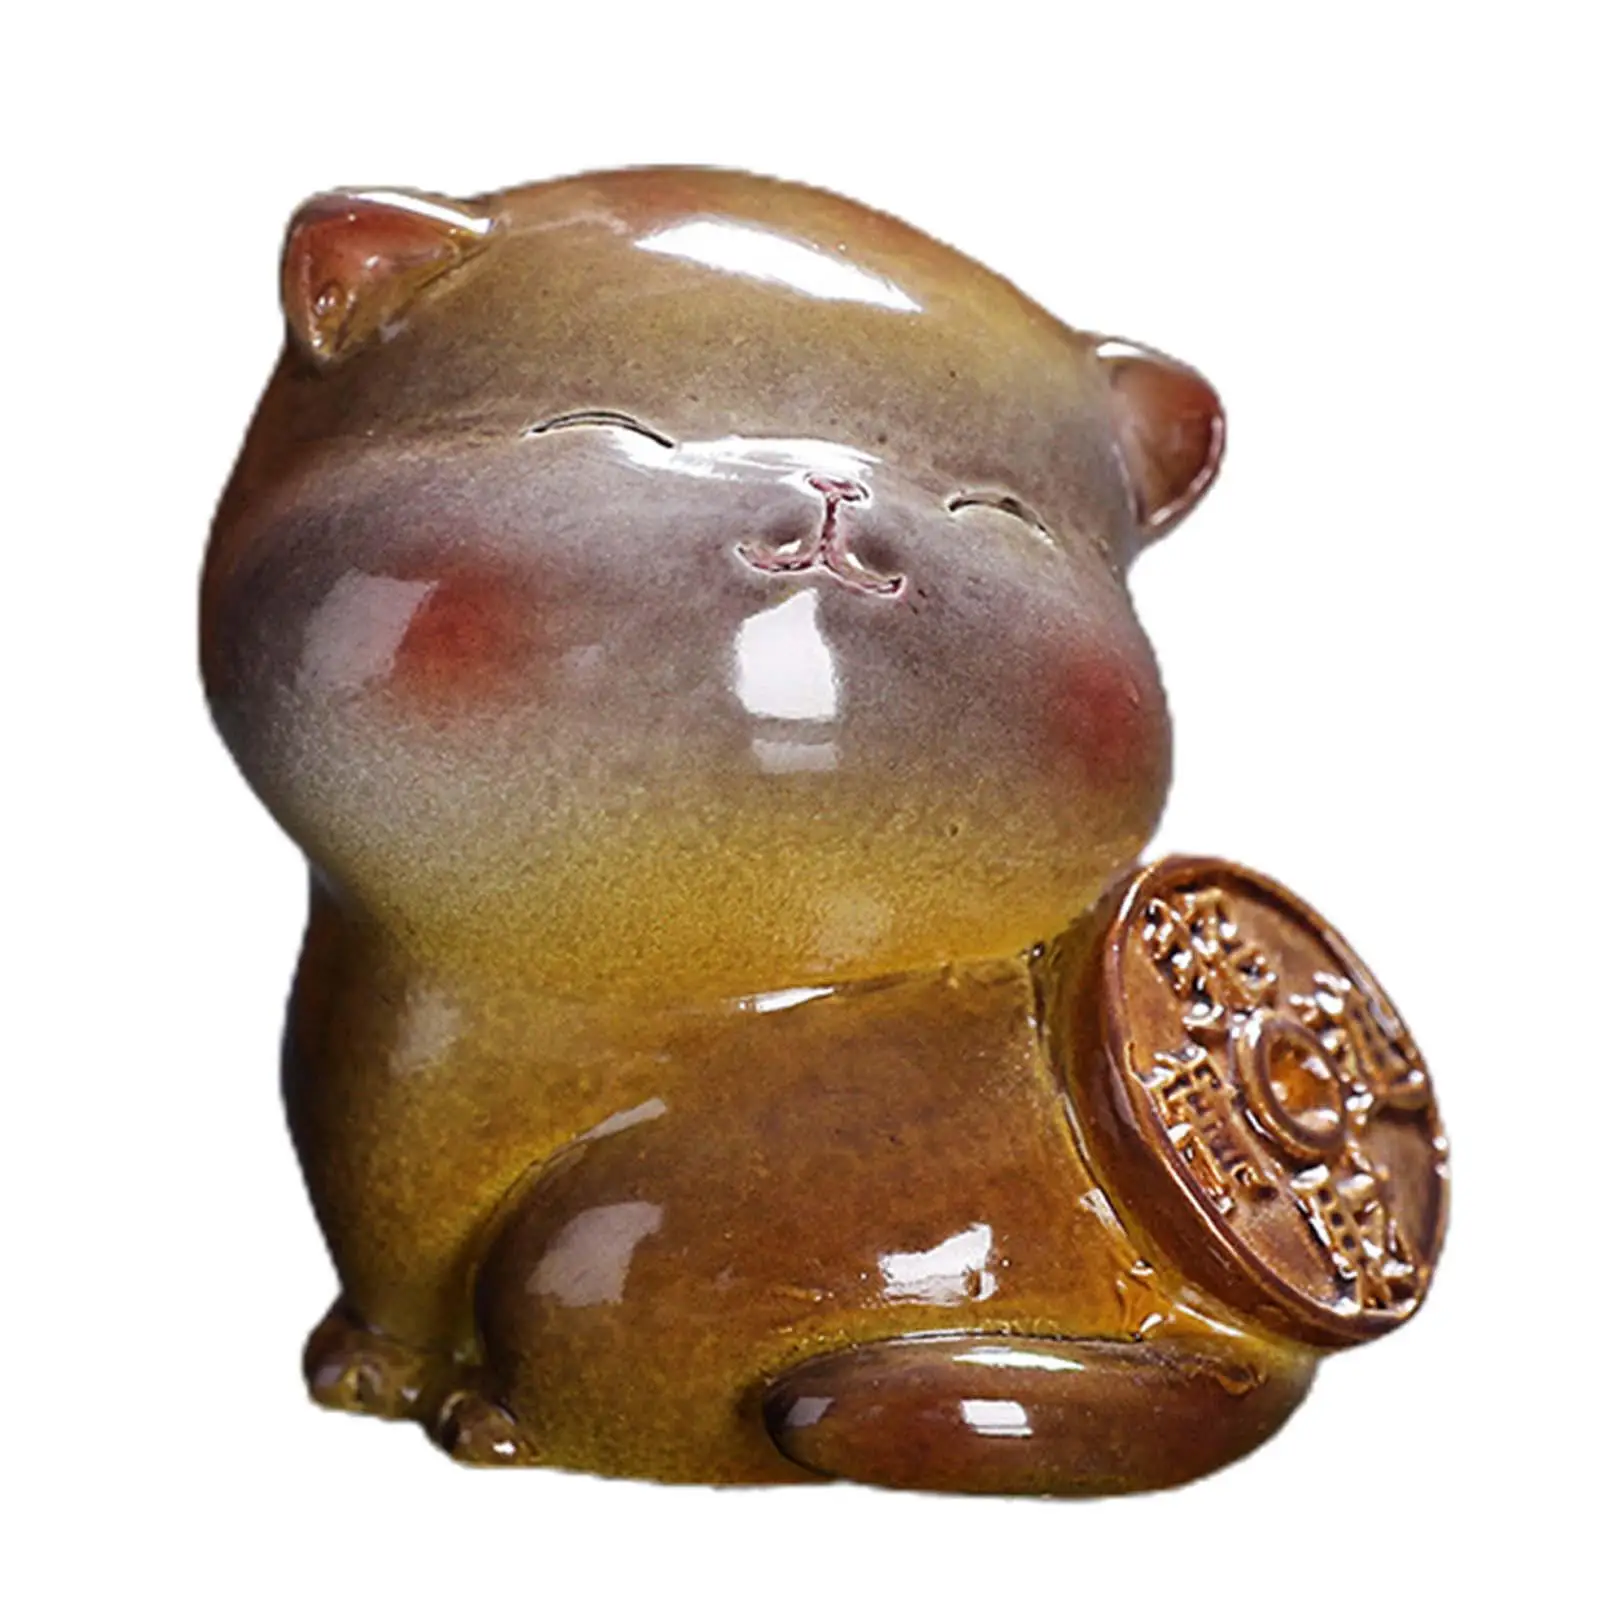 Tea Pet Cat Color Changing Lovely Resin Crafts Collectible Small Animal Statue for Living Room Car Office Tea Table Bedroom